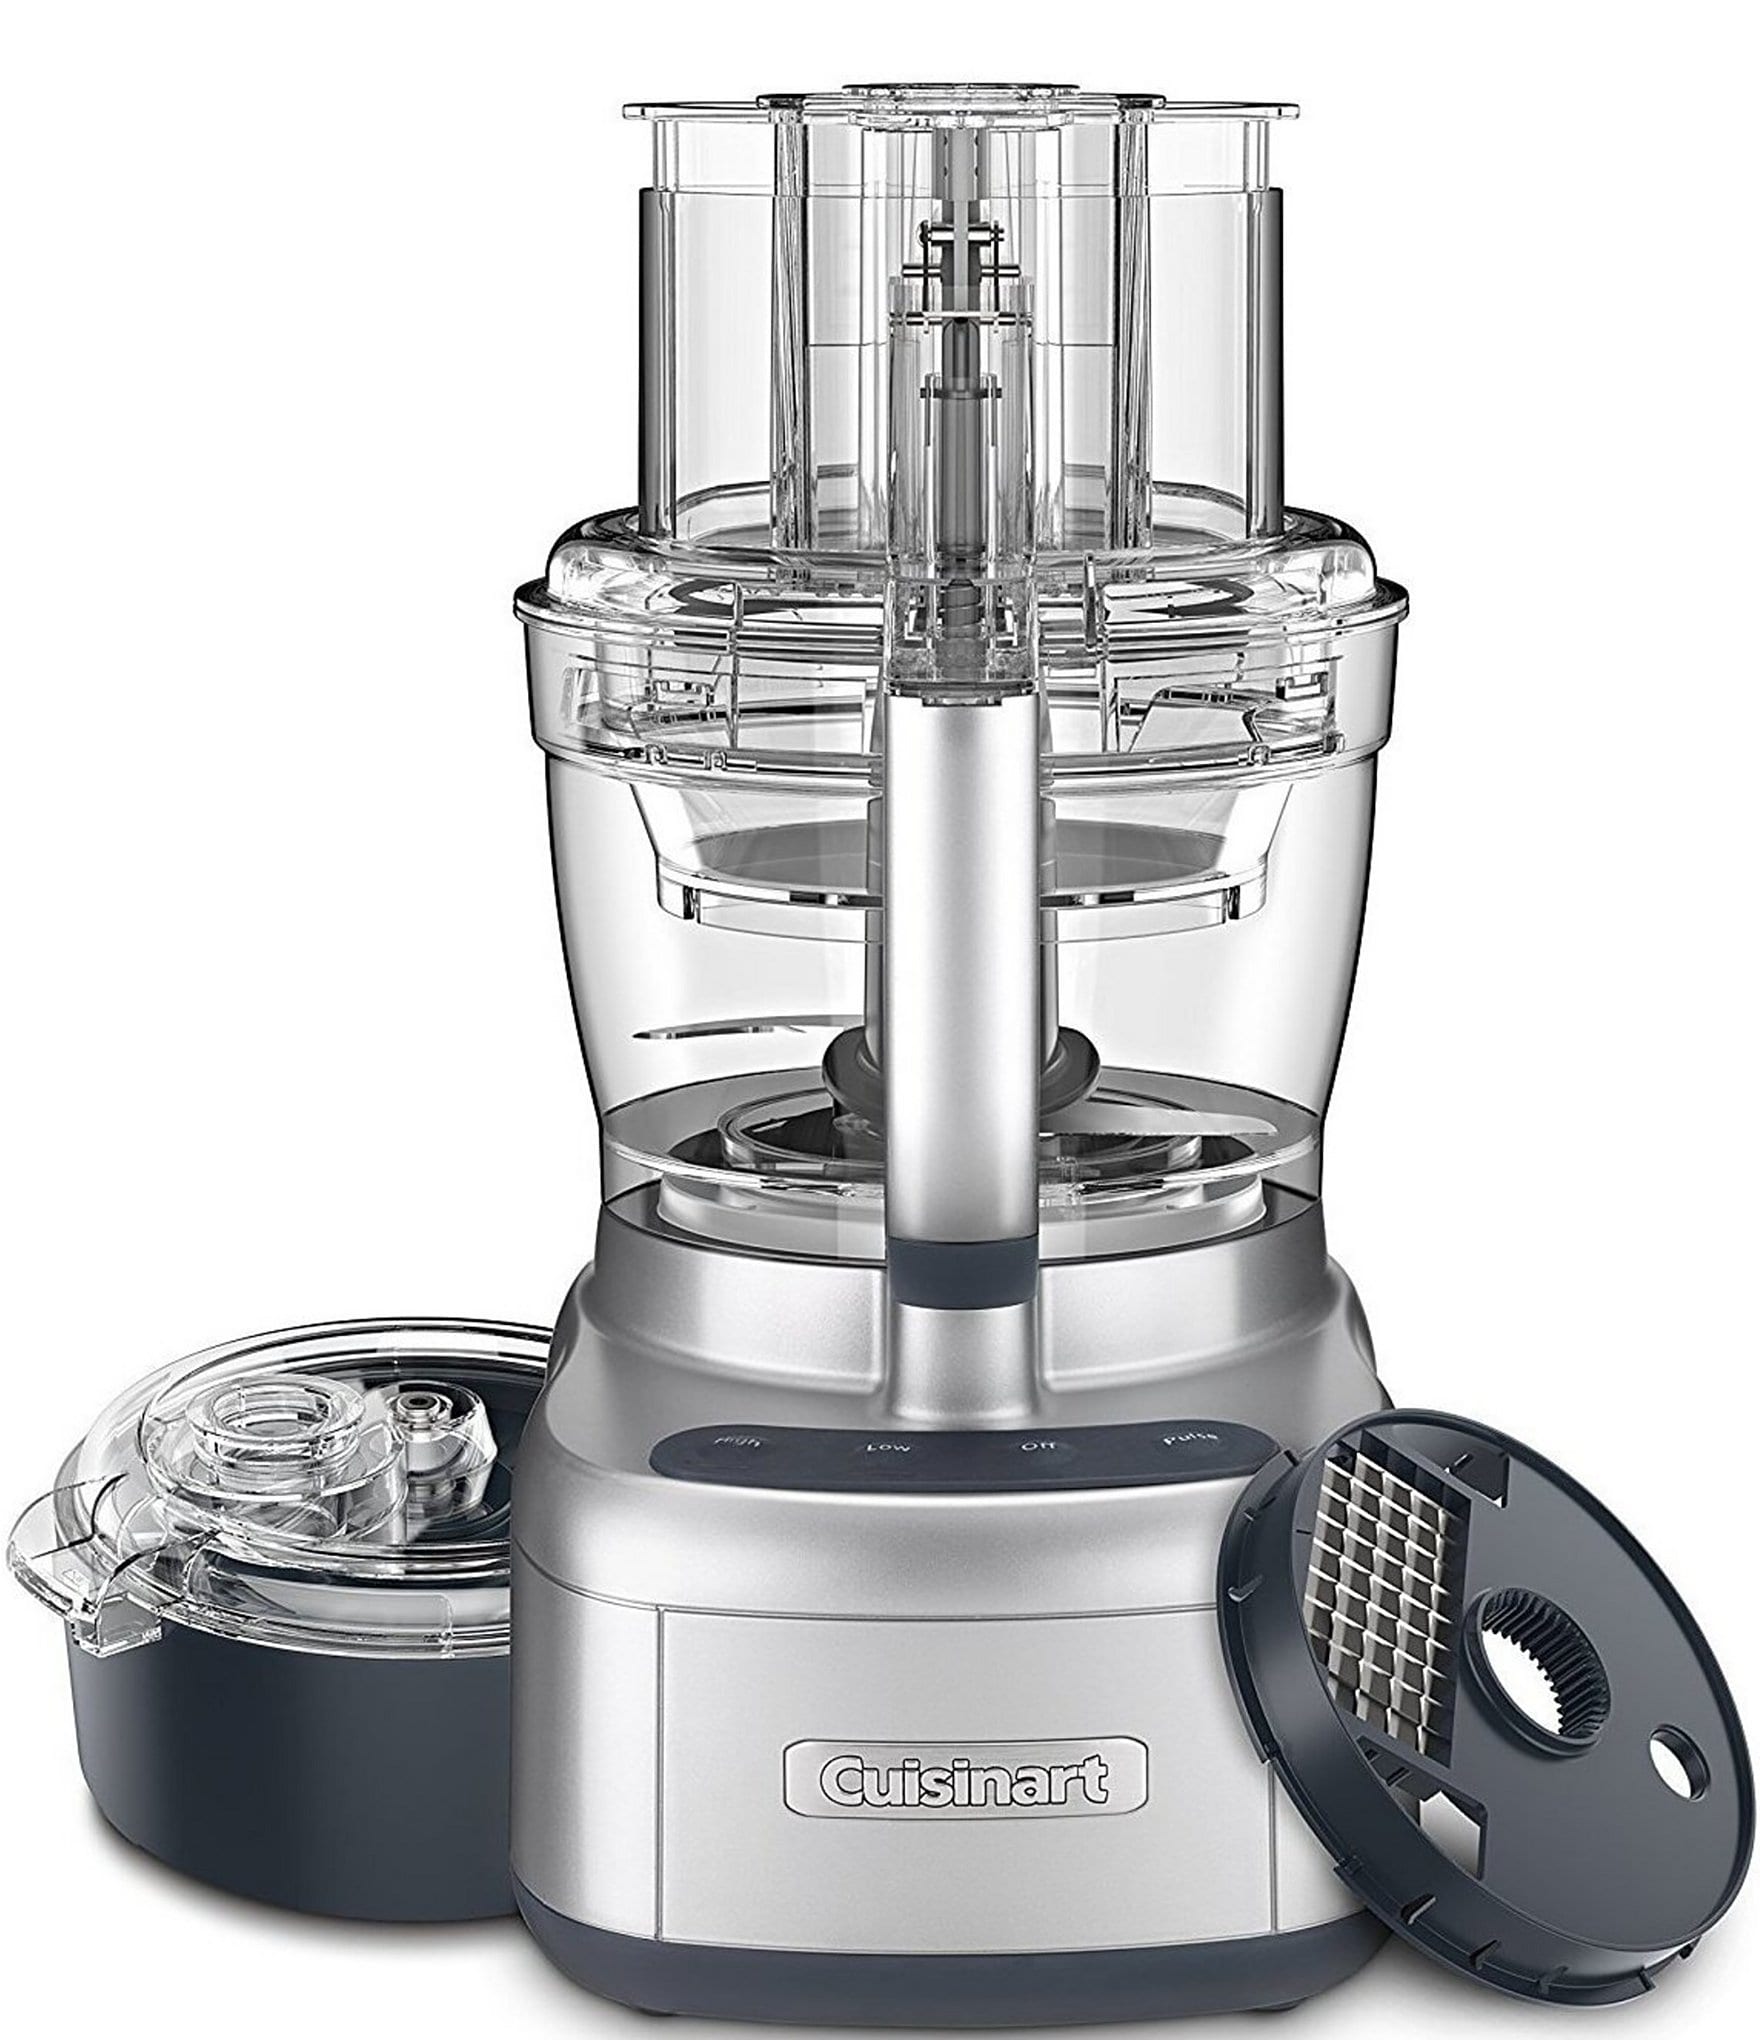 Cuisinart Elemental 13 Cup Food Processor Review & Giveaway